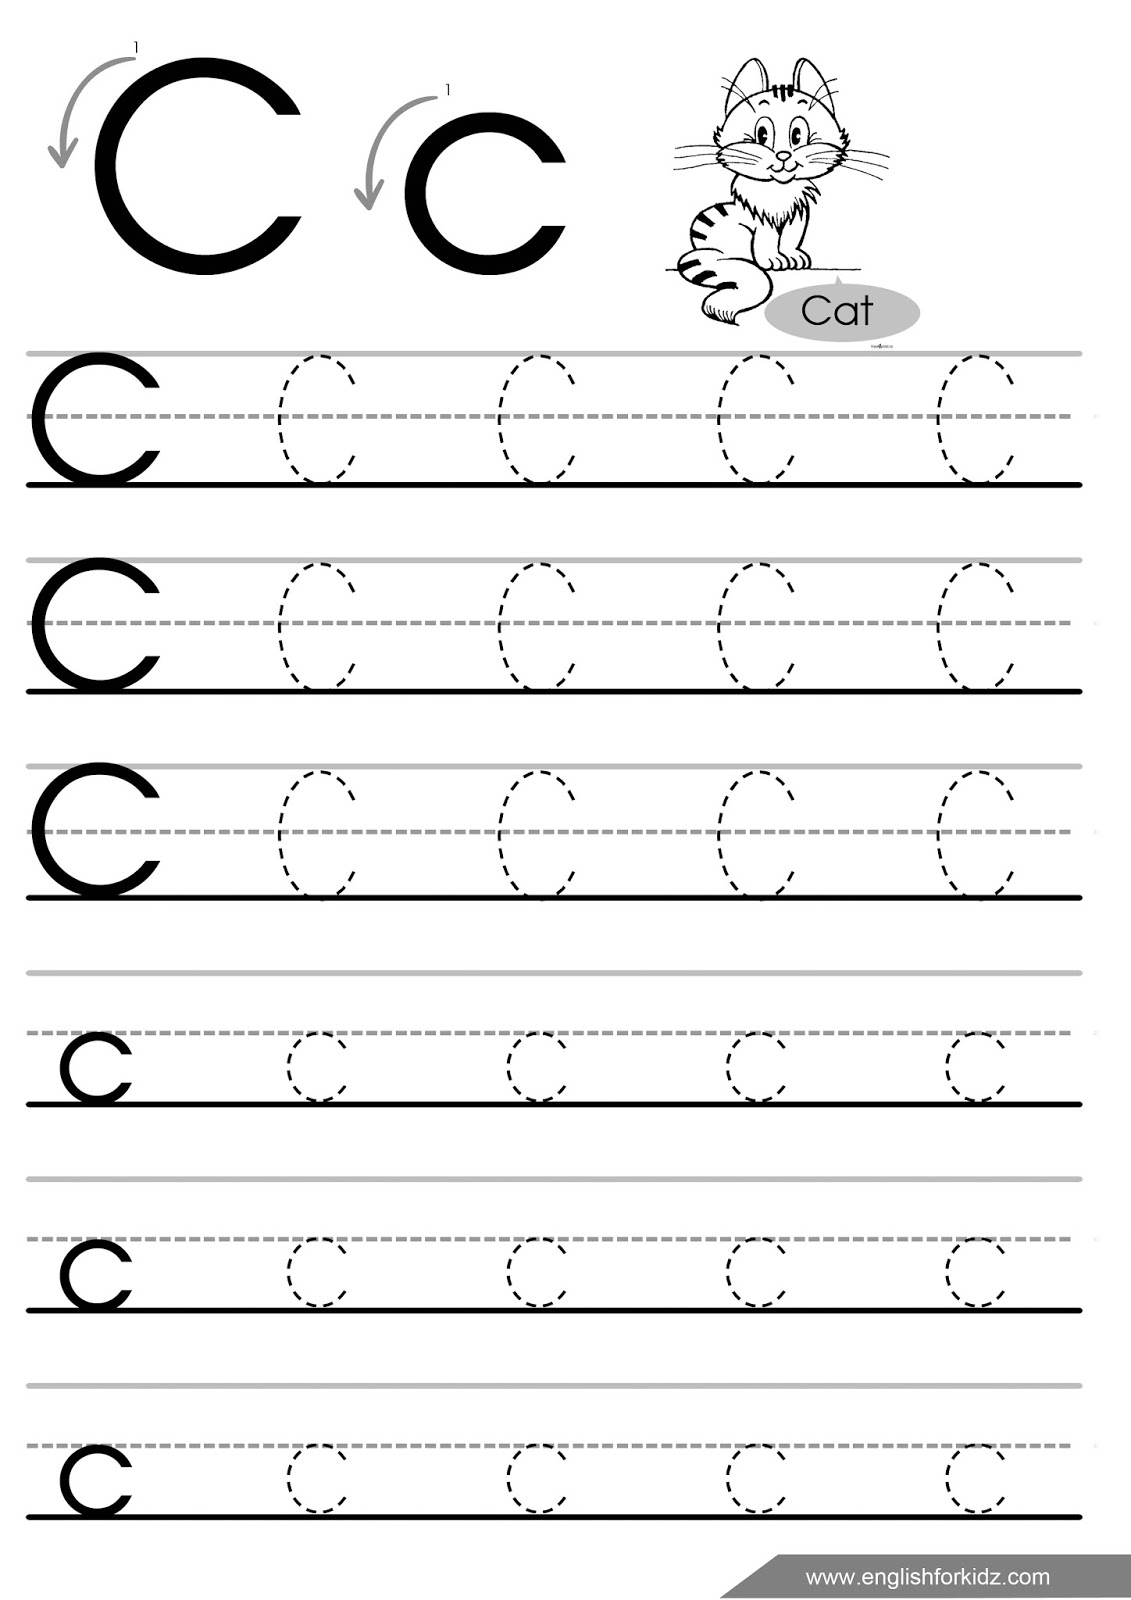 English For Kids Step By Step Letter Tracing Worksheets Letters A J 